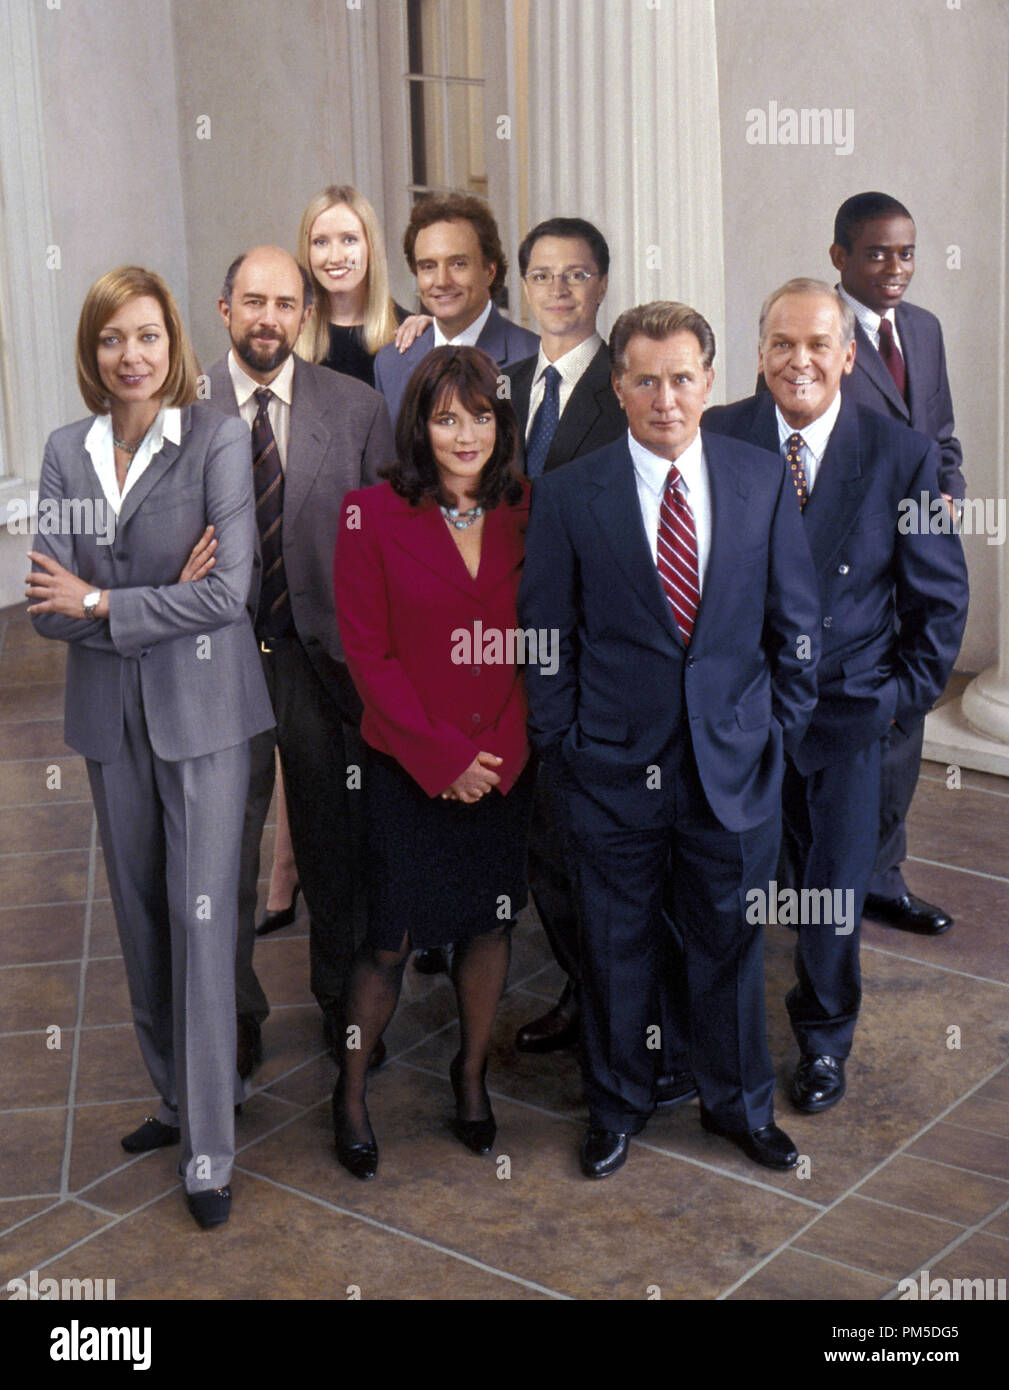 Film Still / Publicity Still from 'The West Wing' Allison Janney, Richard Schiff, Janel Moloney, Bradley Whitford, Stockard Channing, Joshua Malina, Martin Sheen, John Spencer, Dule Hill 2005  File Reference # 30736397THA  For Editorial Use Only -  All Rights Reserved Stock Photo